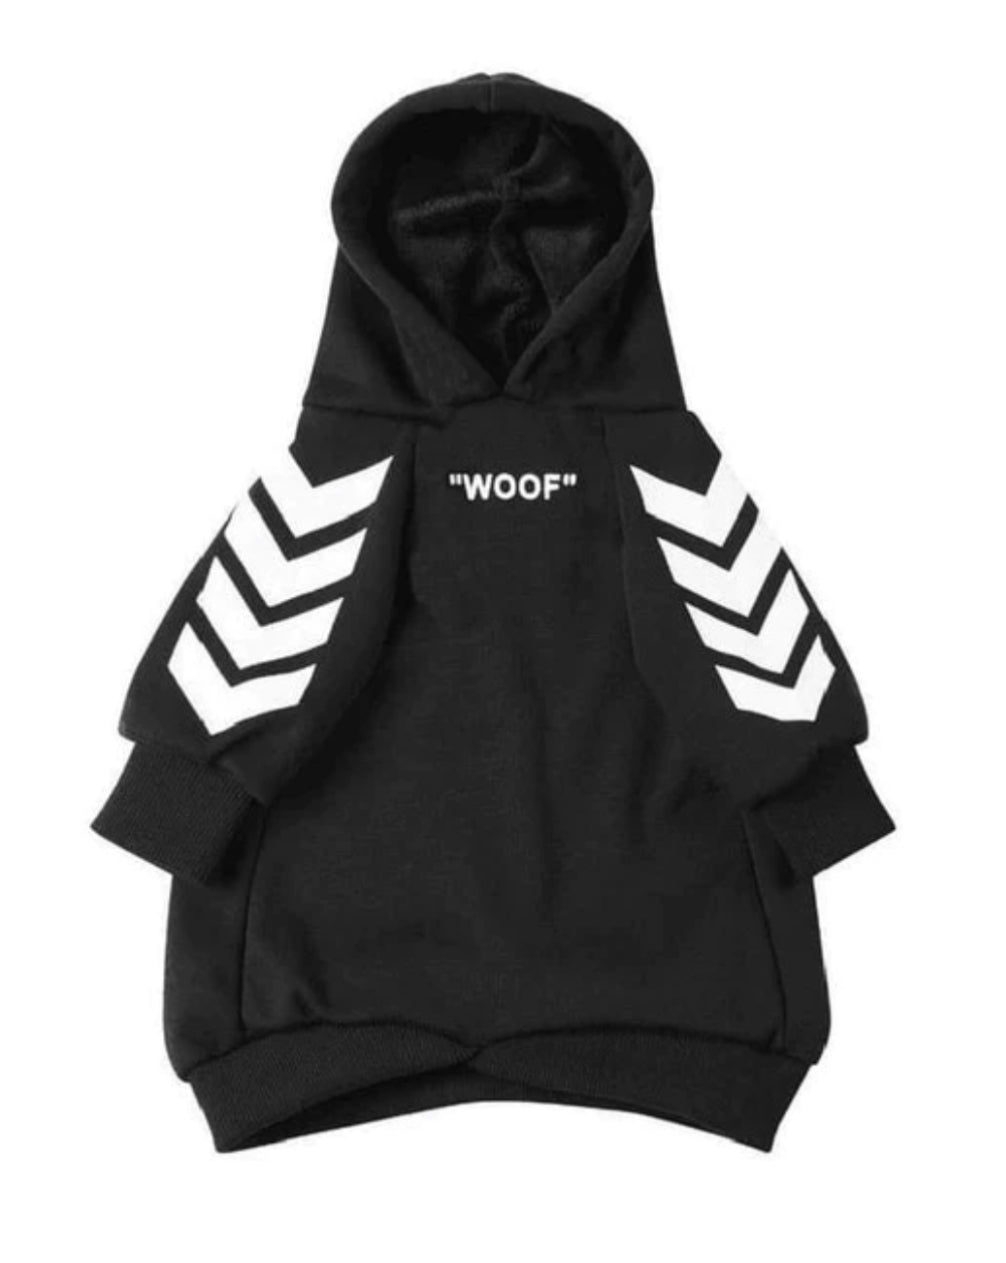 Black WOOF Super fashion hooded sweatshirt 100% cotton. Luxury chic clothing for dogs, cats and pets.